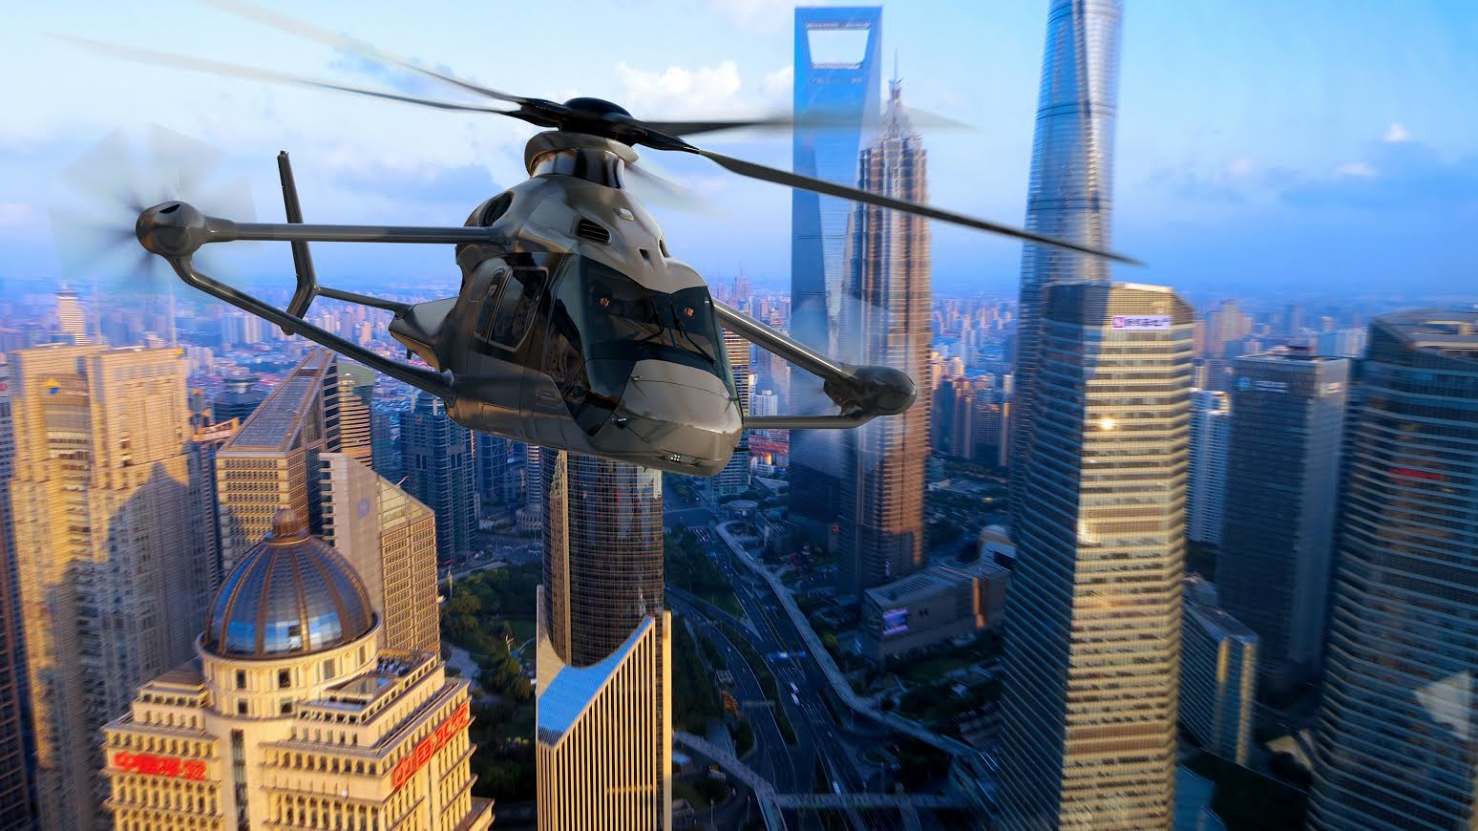 Paris 2017 : Airbus Helicopters reveals Racer high-speed demonstrator